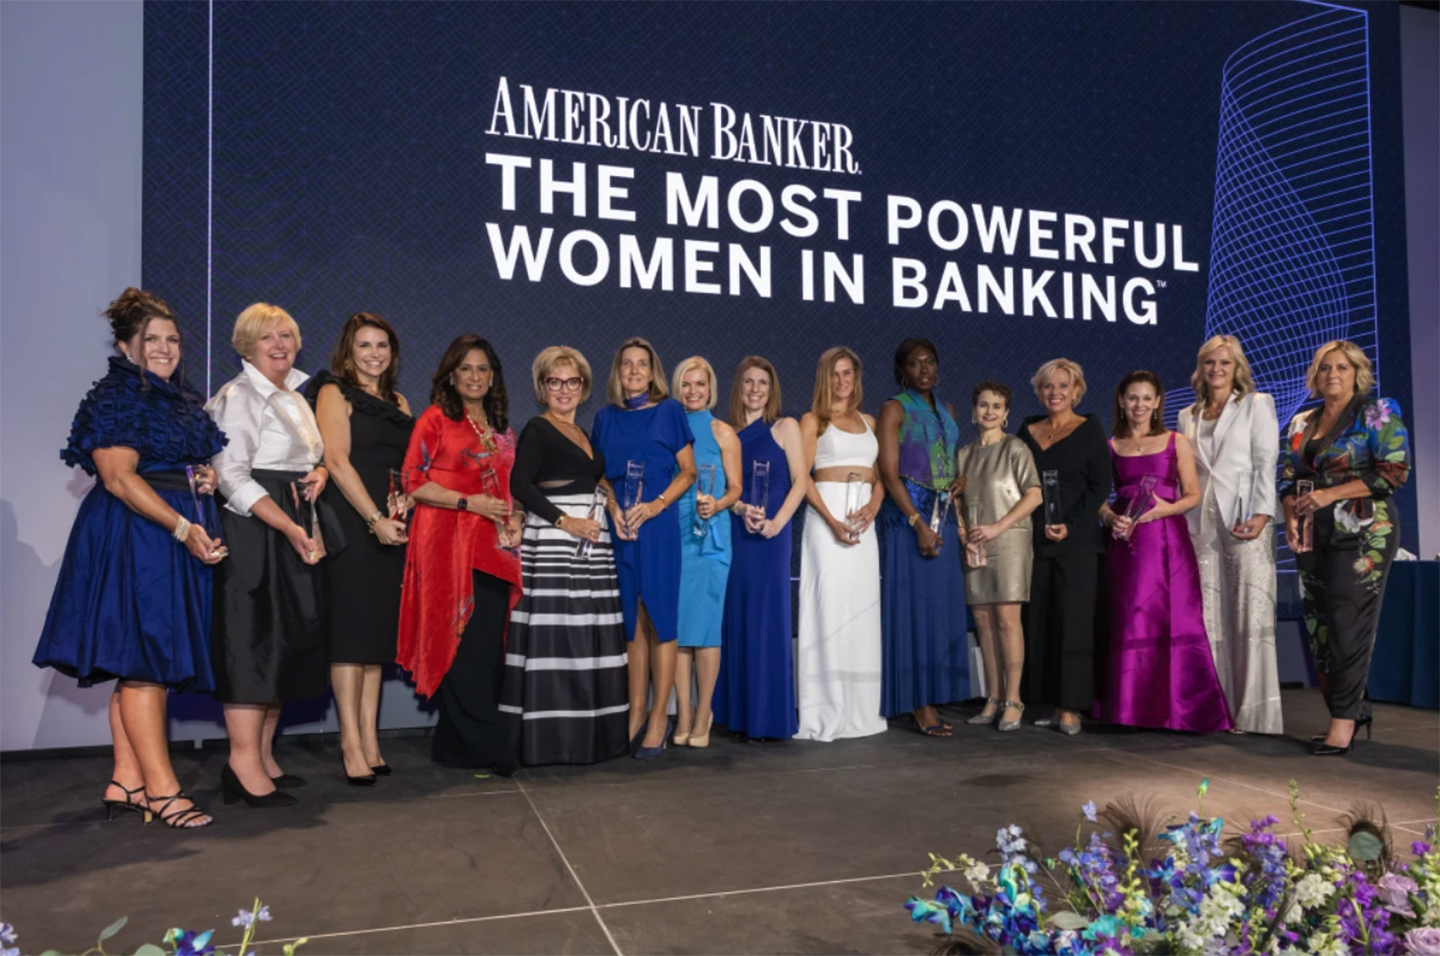 hoto courtesy of American Banker from the 2023 Most Powerful Women in Banking Gala. Photographer: Donna Alberco.